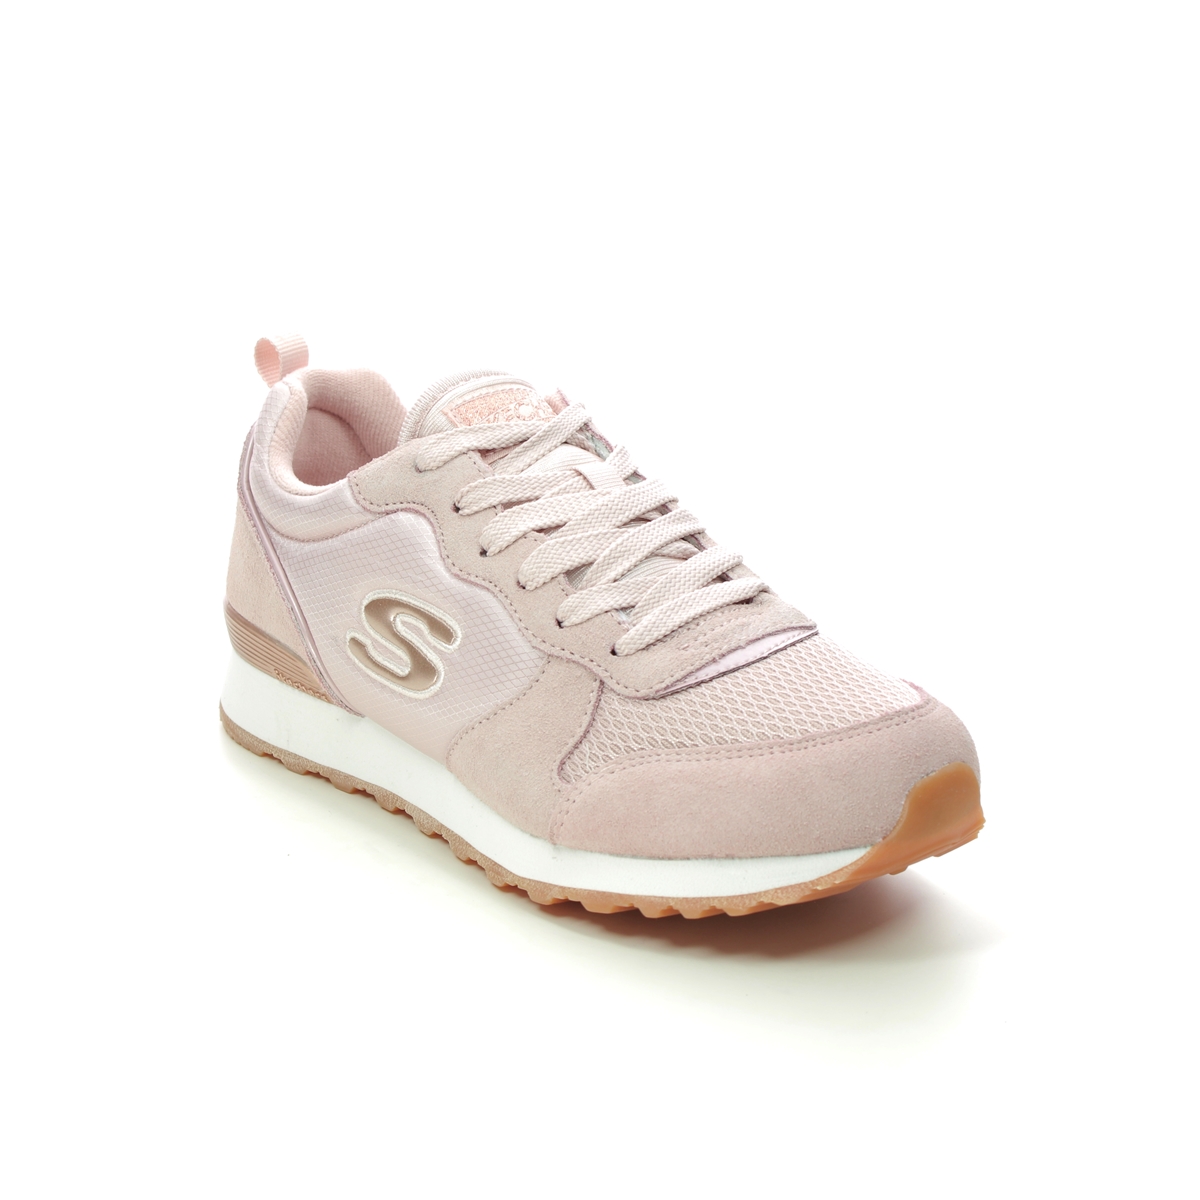 Skechers Og 85 Gold Gurl Blush Pink Womens Trainers 111 In Size 3 In Plain Blush Pink